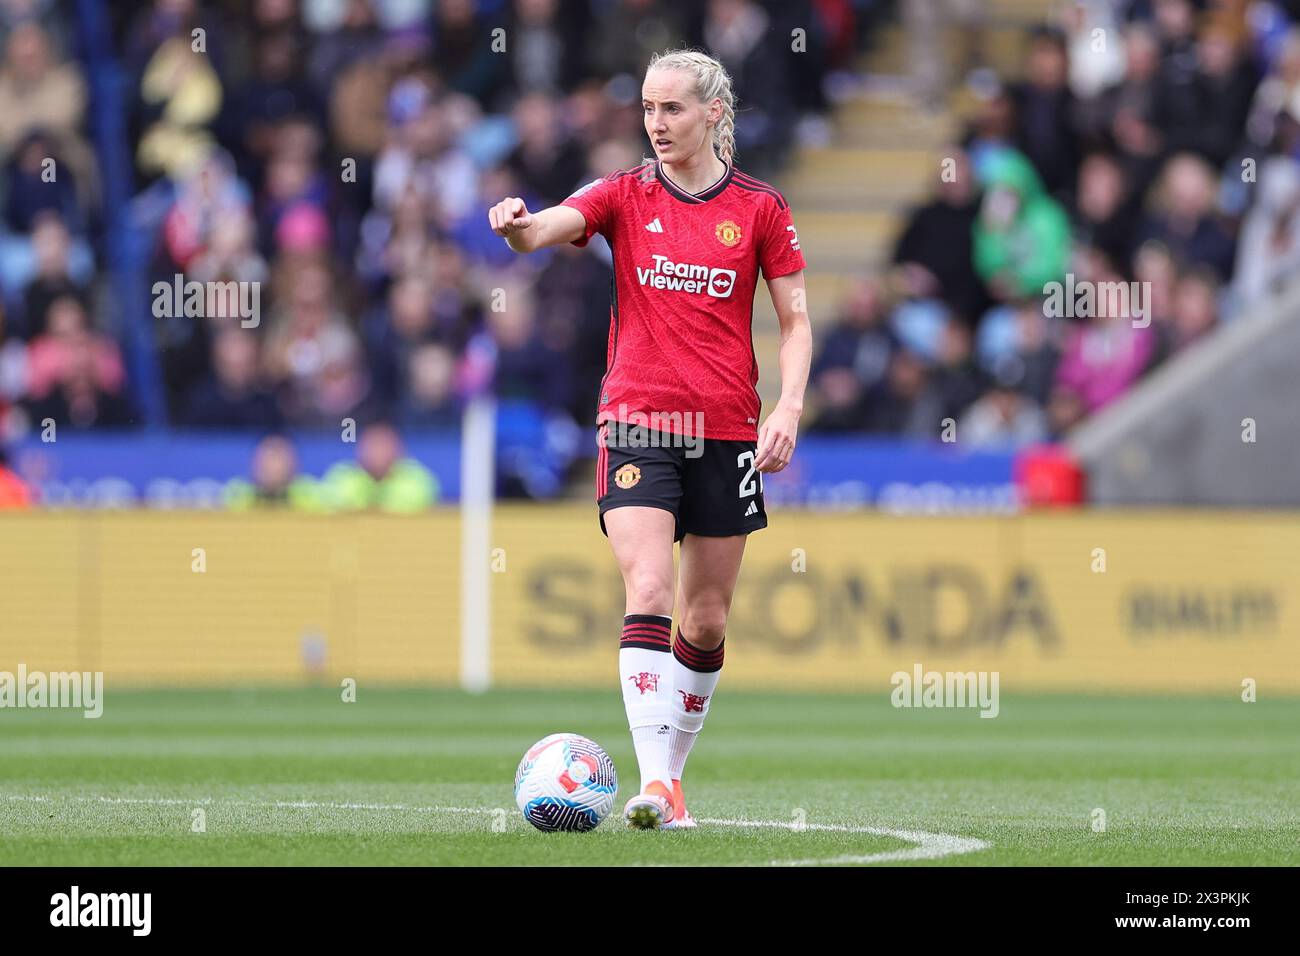 King Power Stadium, Leicester, domenica 28 aprile 2024. Millie Turner del Manchester United durante il Barclays WomenÕs Super League match tra Leicester City e Manchester United al King Power Stadium di Leicester domenica 28 aprile 2024. (Crediti: James Holyoak / Alamy Live News) Foto Stock